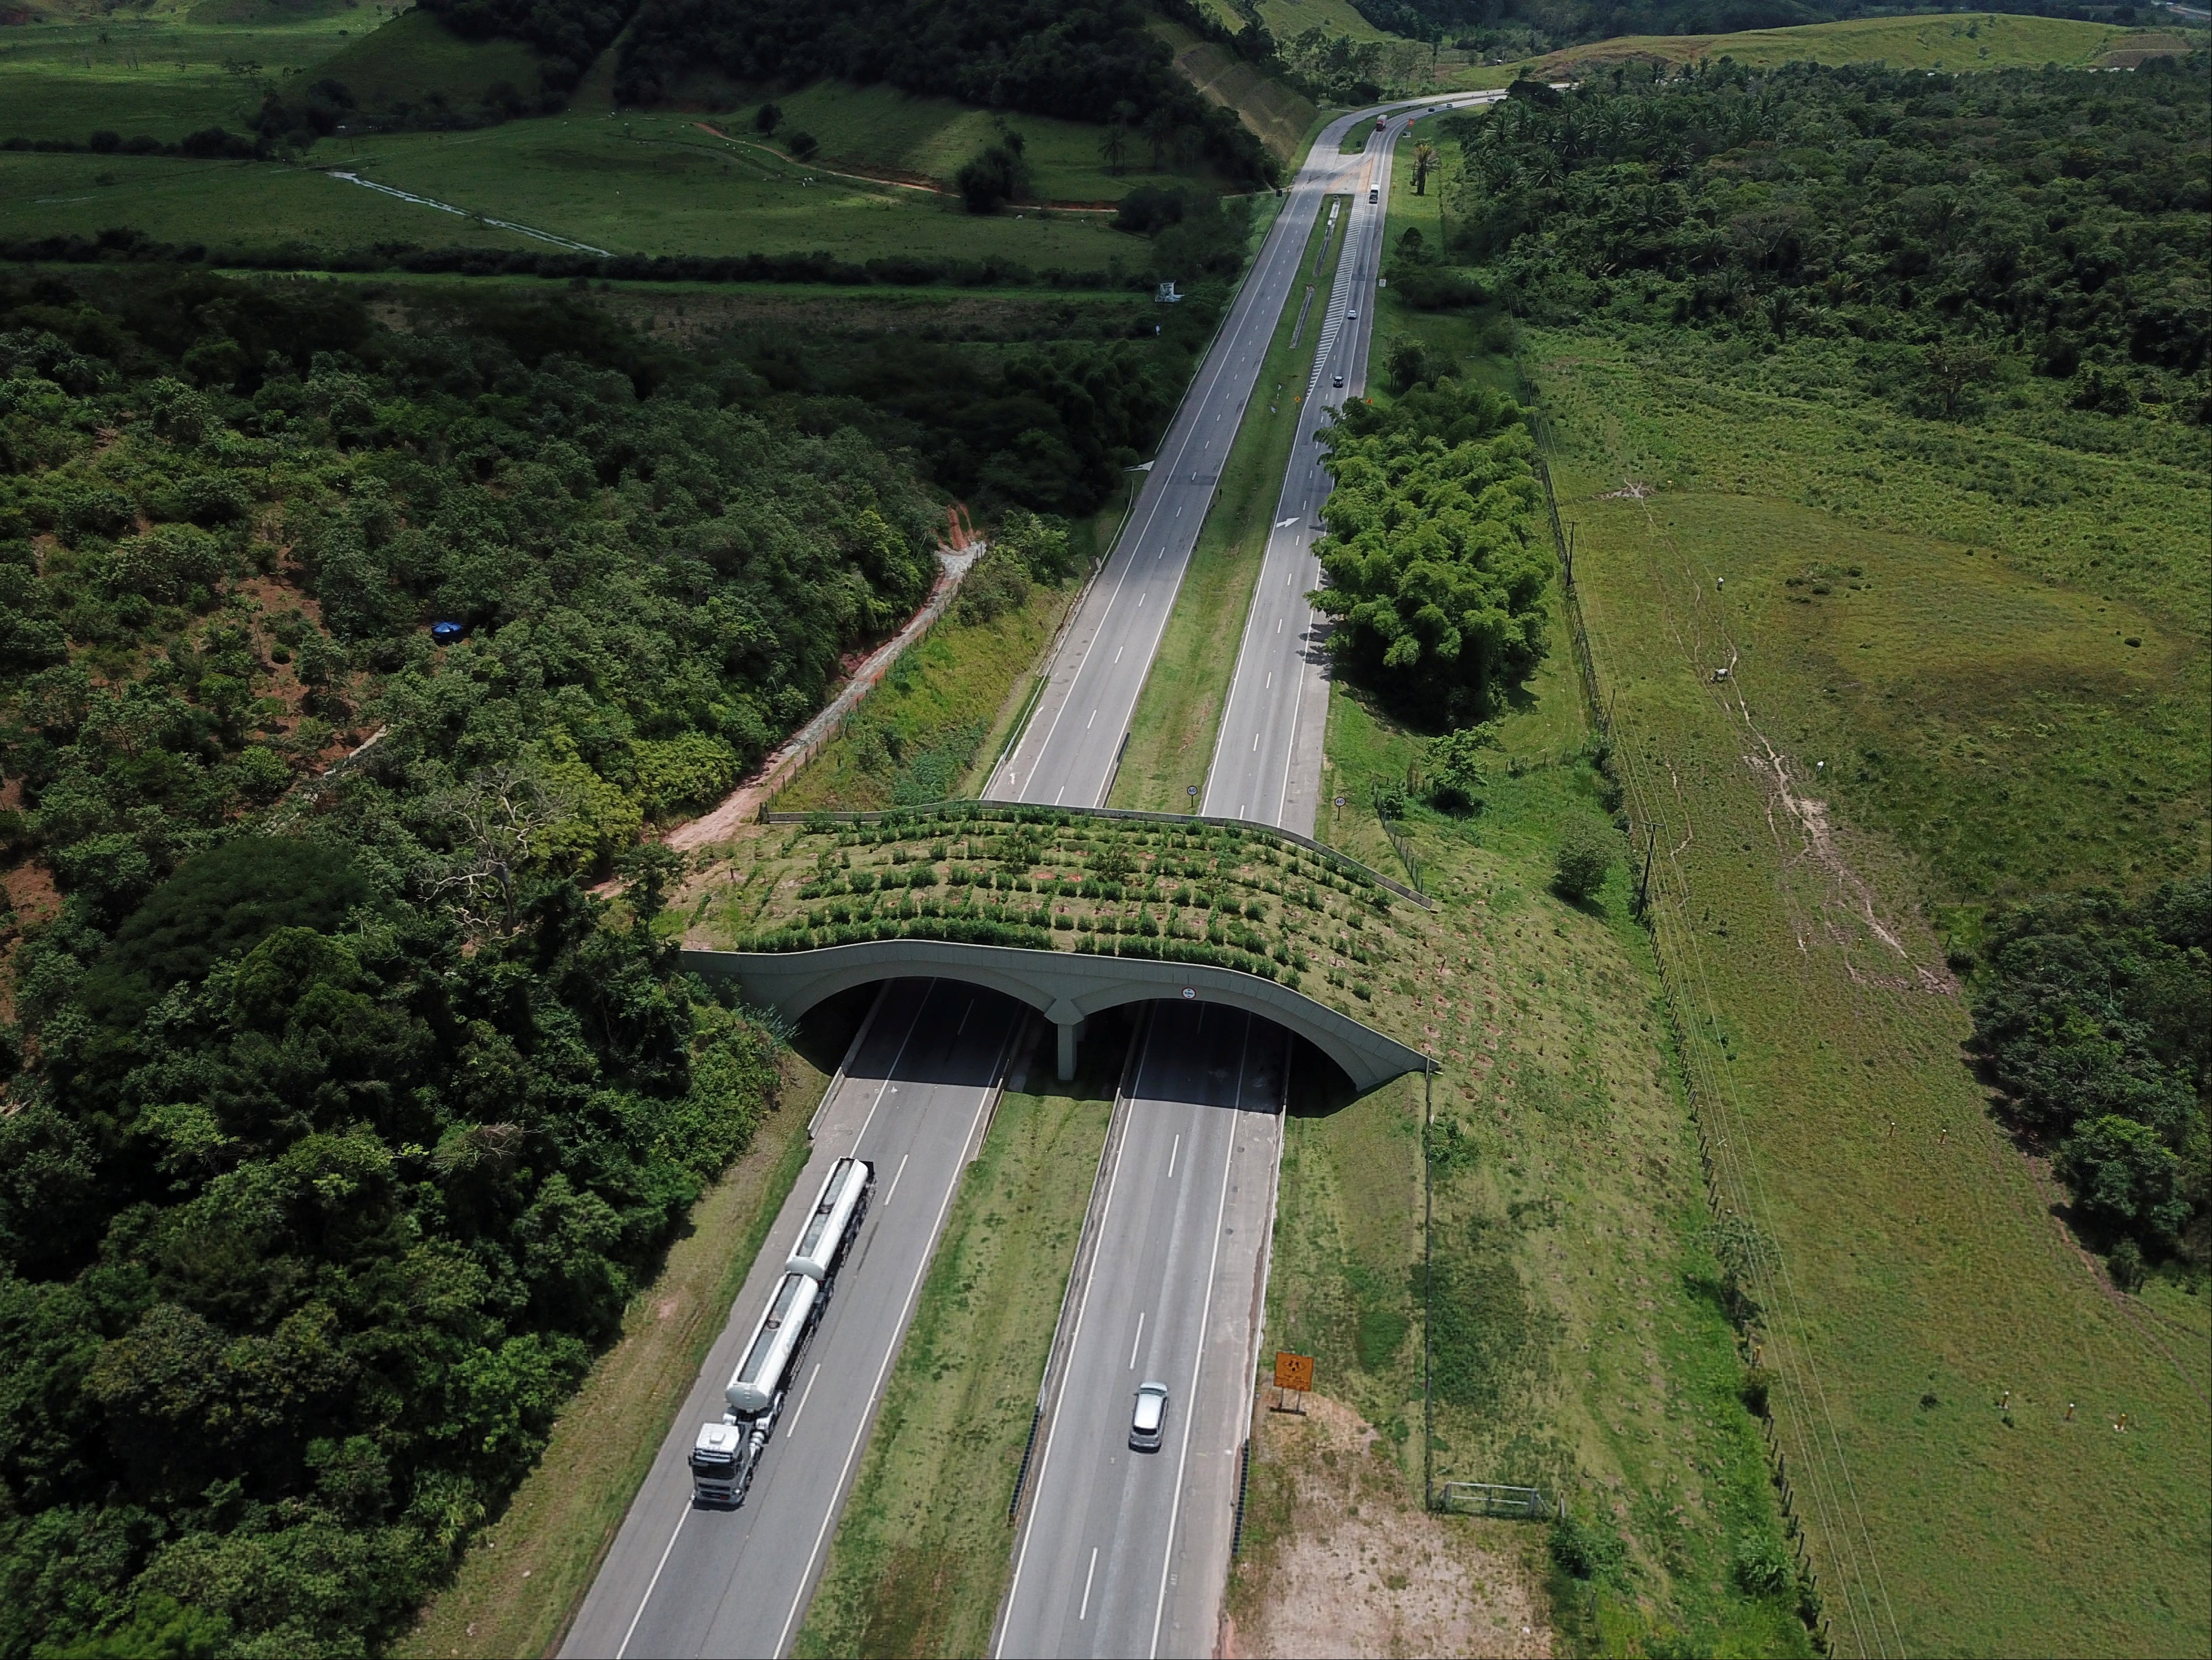 Conservationists have built an ecological bridge to help endangered golden lion tamarins cross a busy highway in Brazil